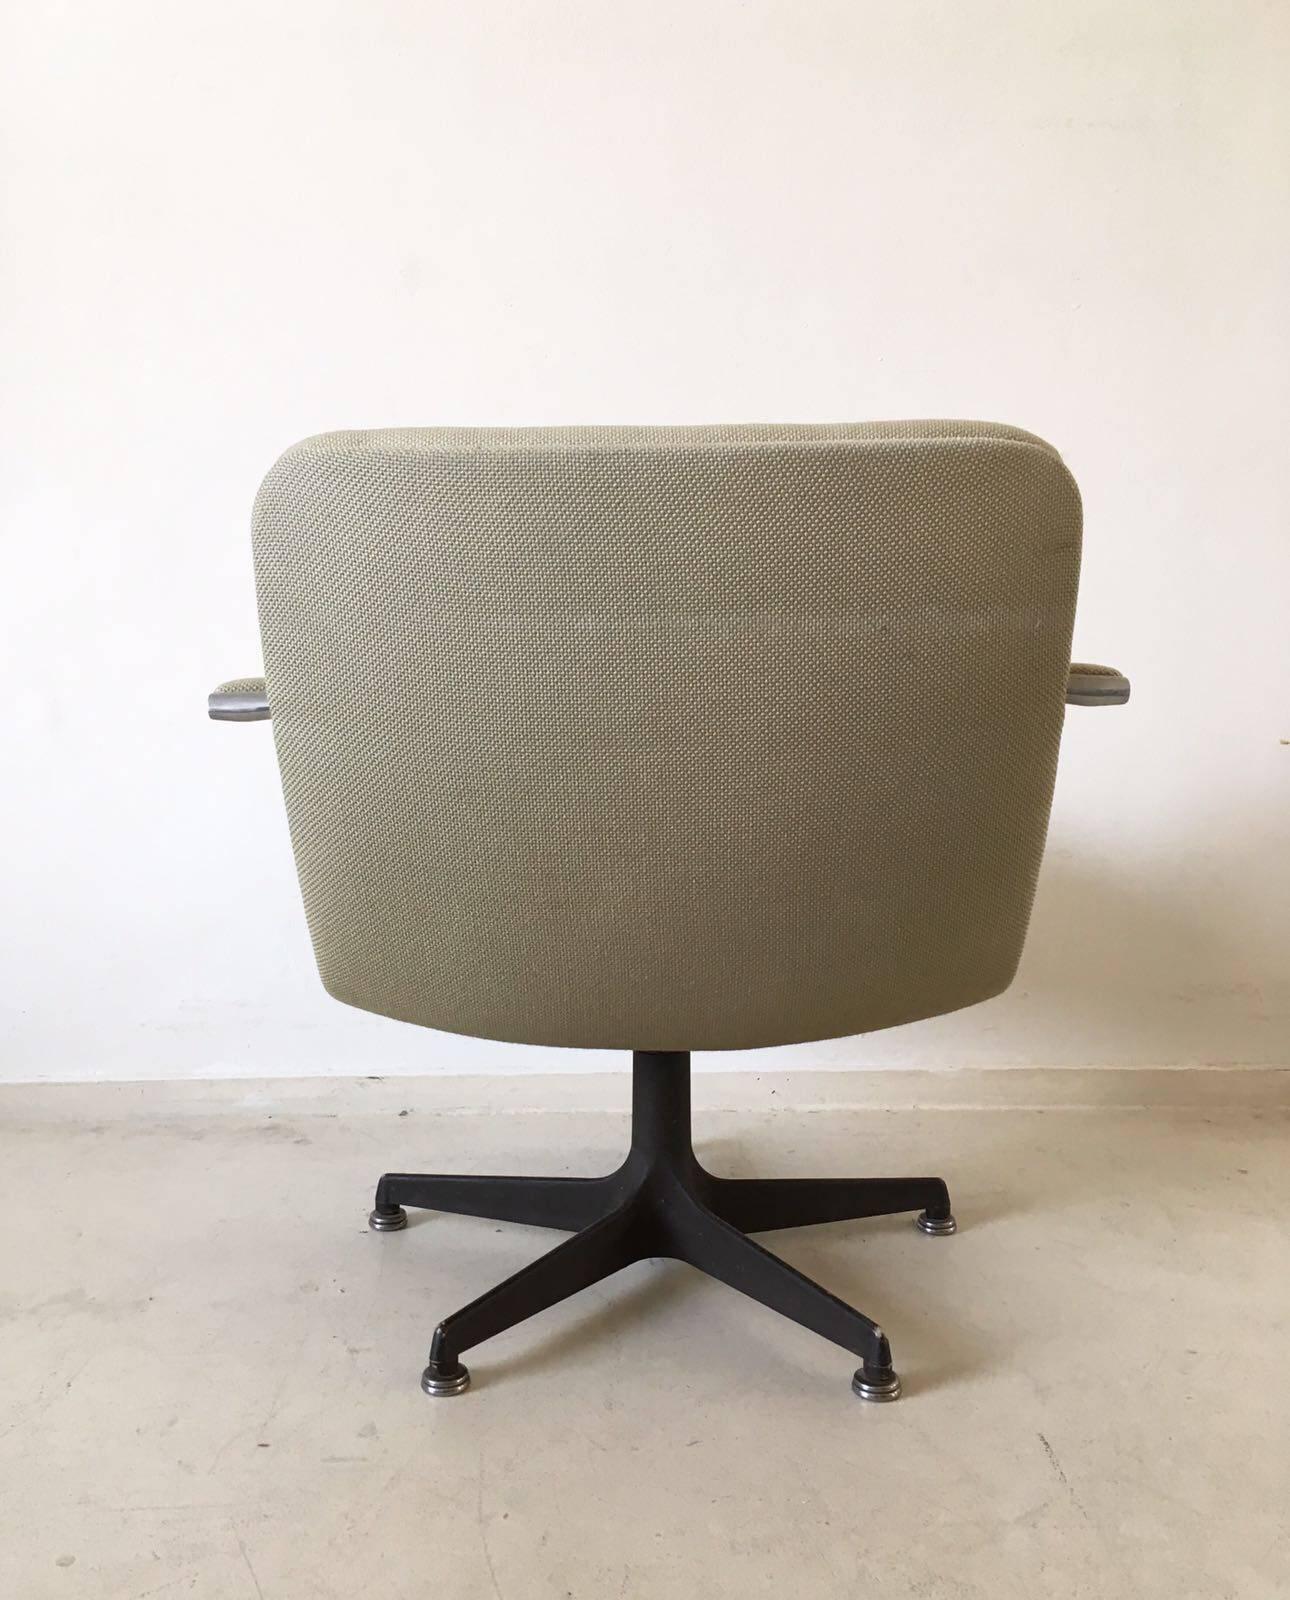 Iconic 1970s Design Swivel Chair from Artifort, Designed by Geoffrey Harcourt In Good Condition For Sale In Schagen, NL